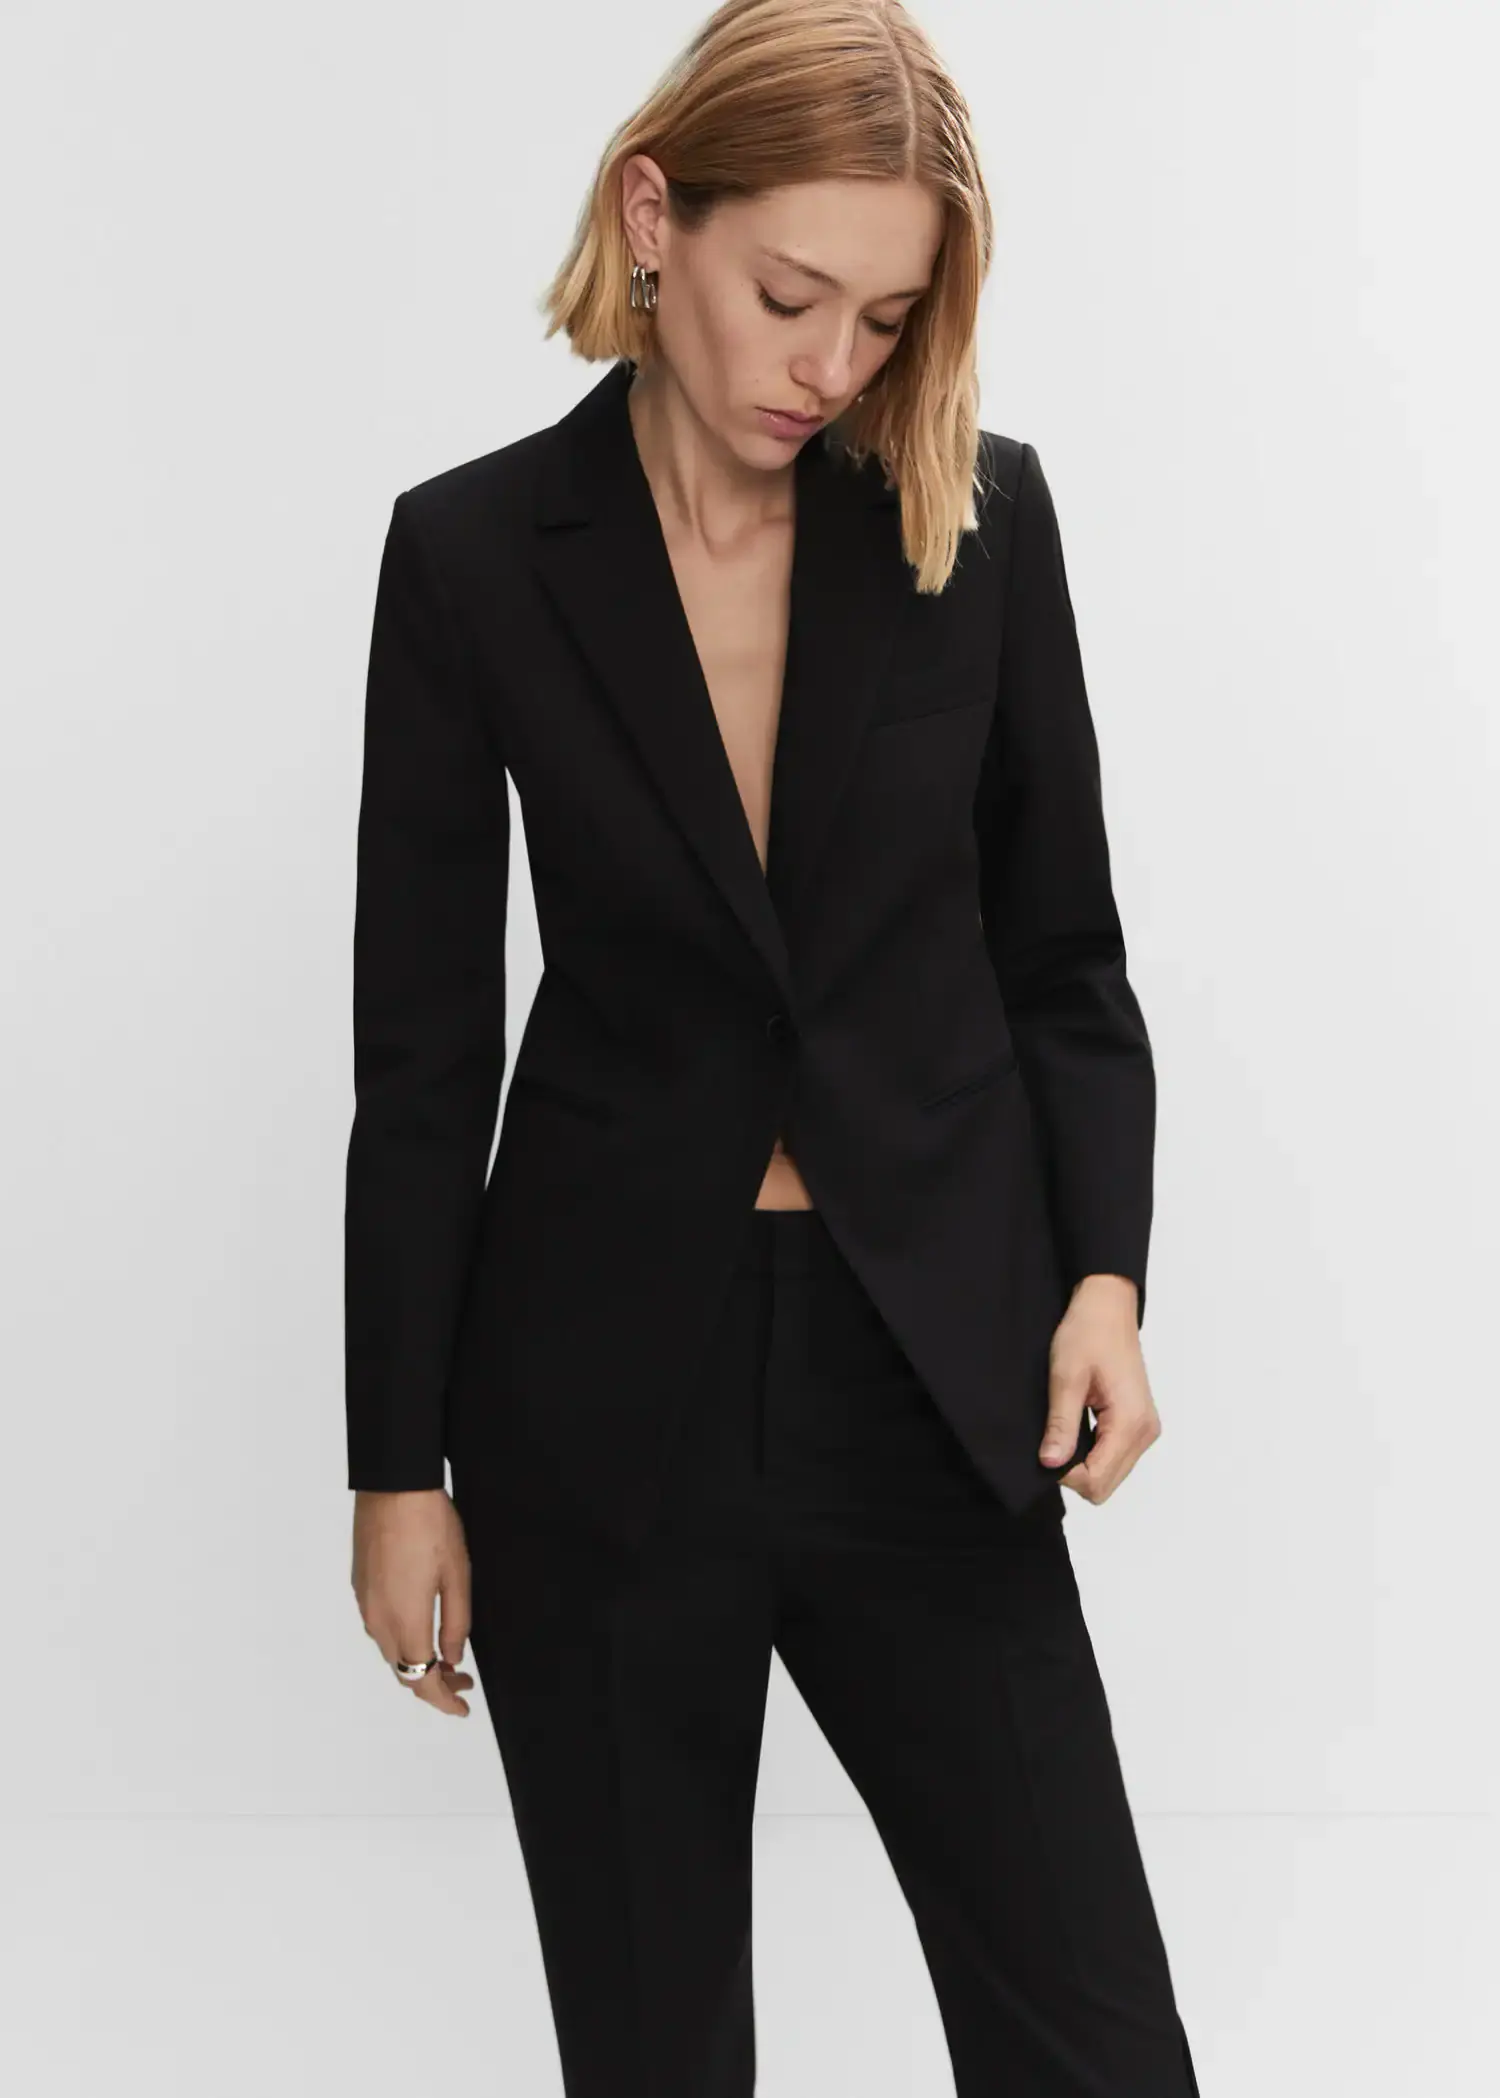 Mango Fitted suit jacket. a woman in a black suit is posing for a picture 